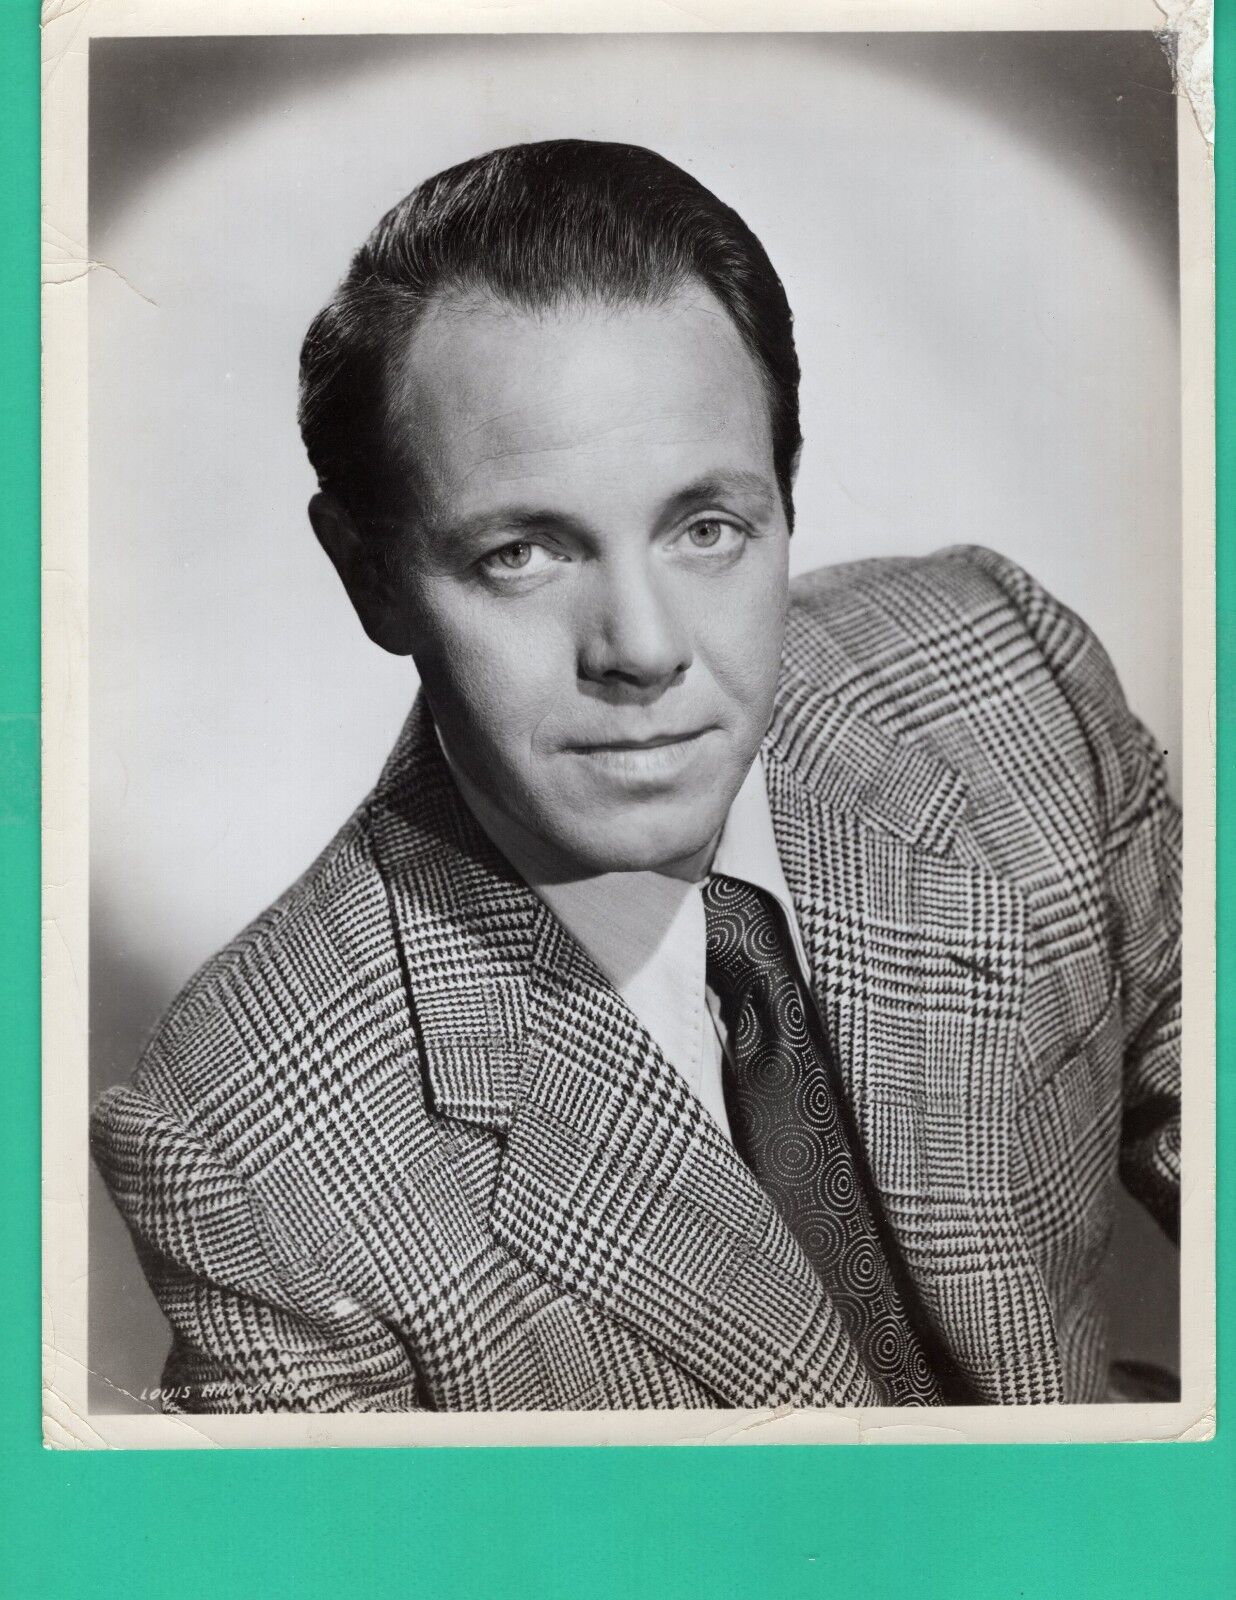 LOUIS HAYWARD Movie Star Actor Promo 1940's Vintage Photo Poster painting 8x10